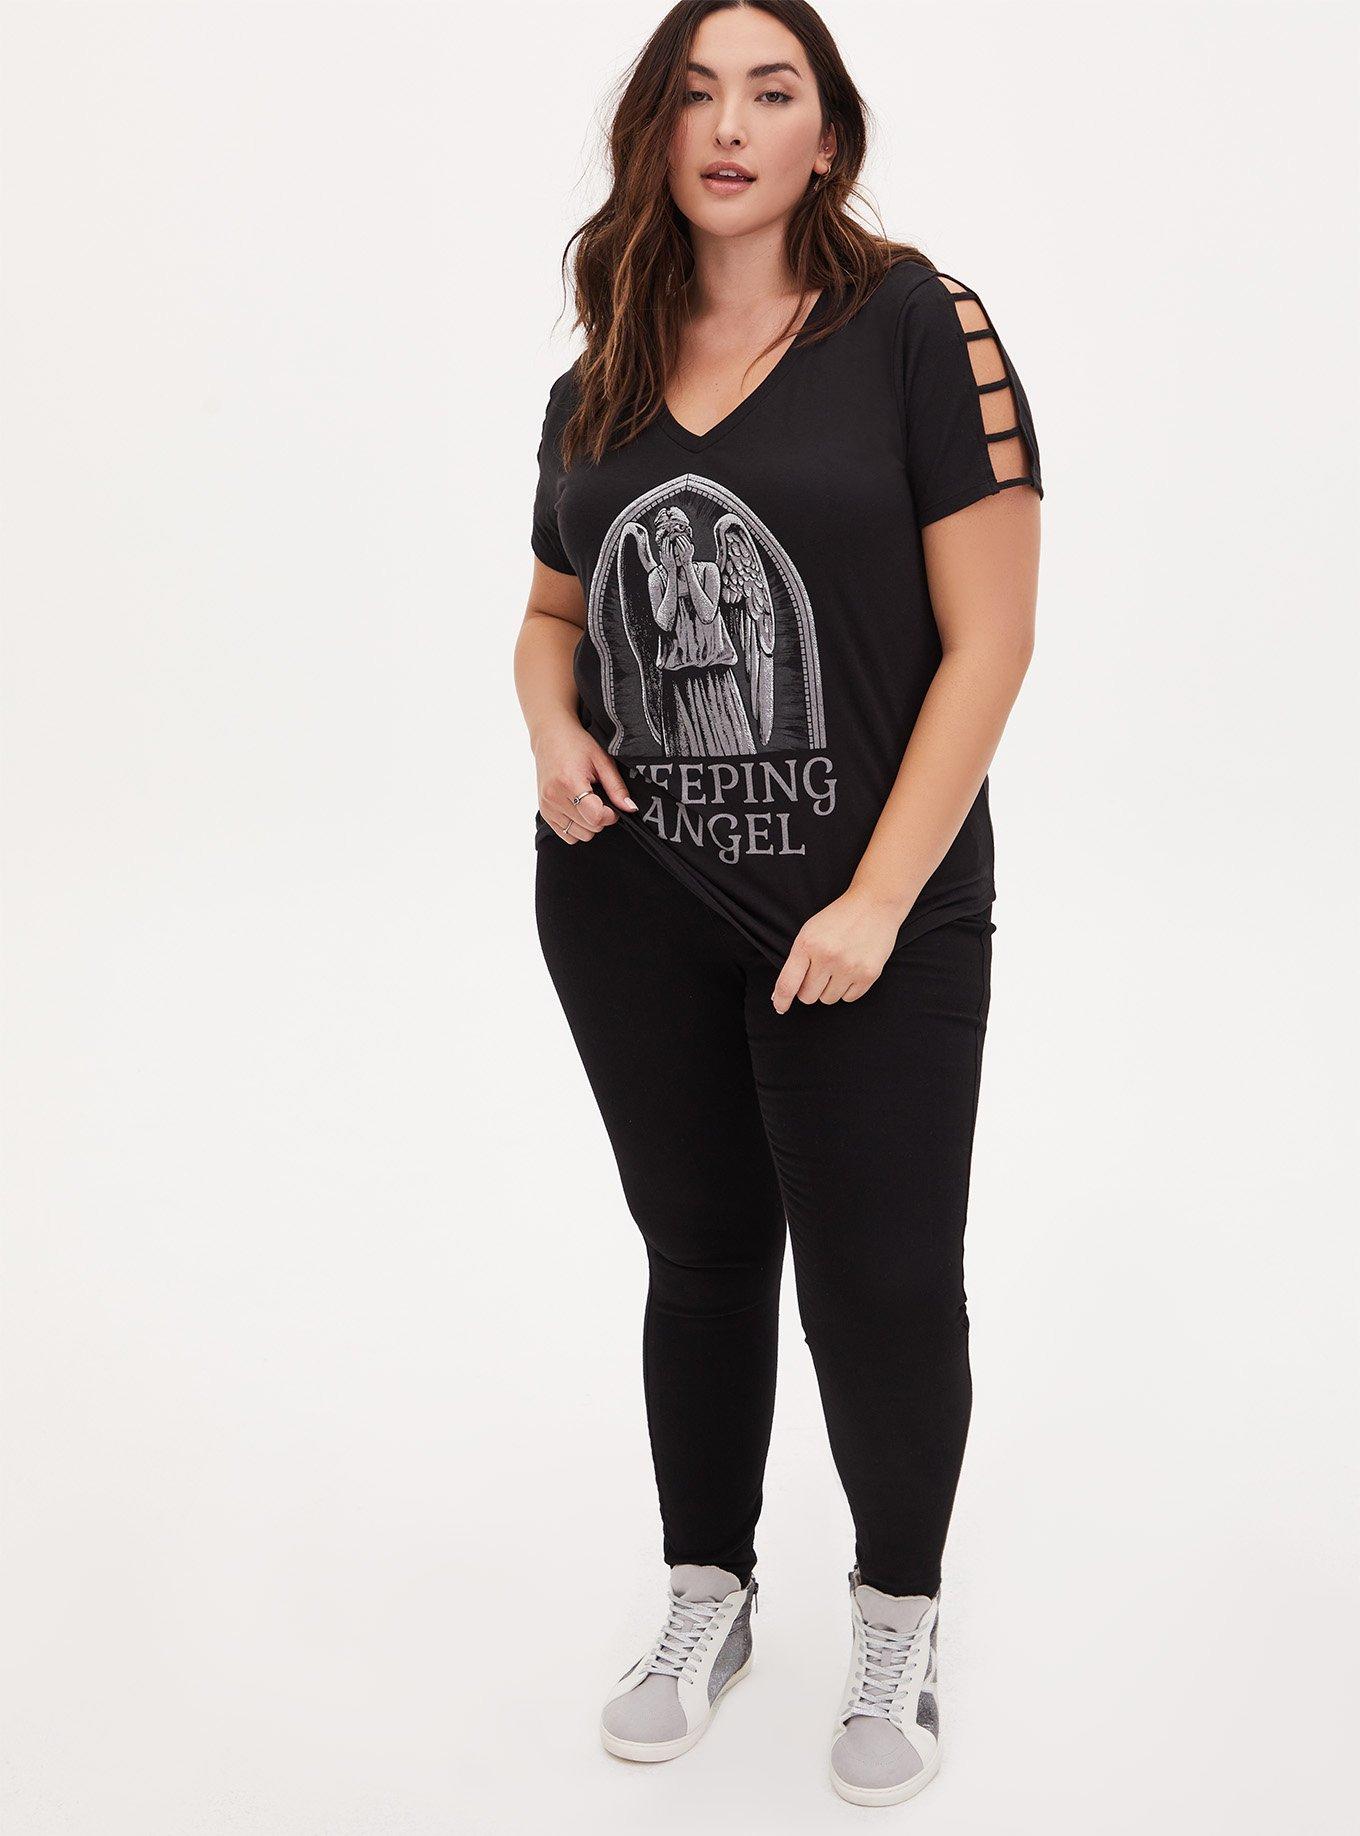 Plus Size - Her Universe Doctor Who Weeping Angel Ladder Sleeve Top ...